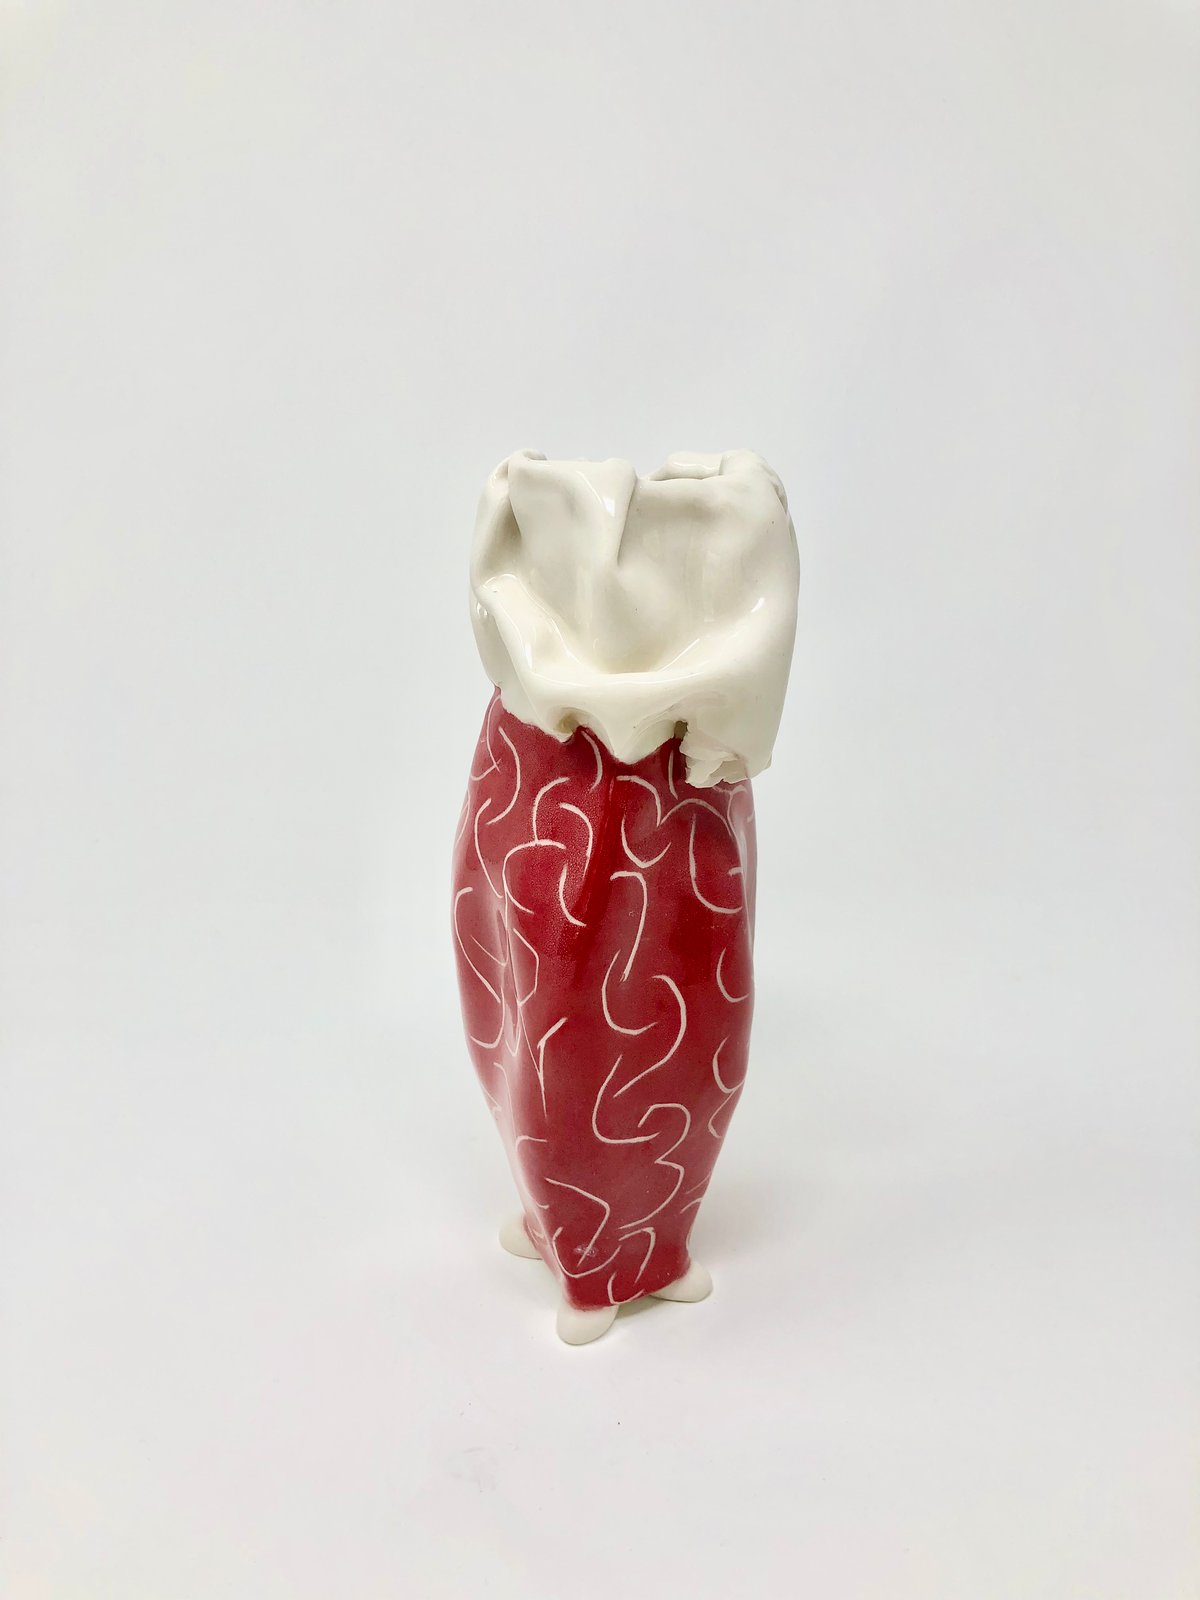 Image of Red and White Bud Vase